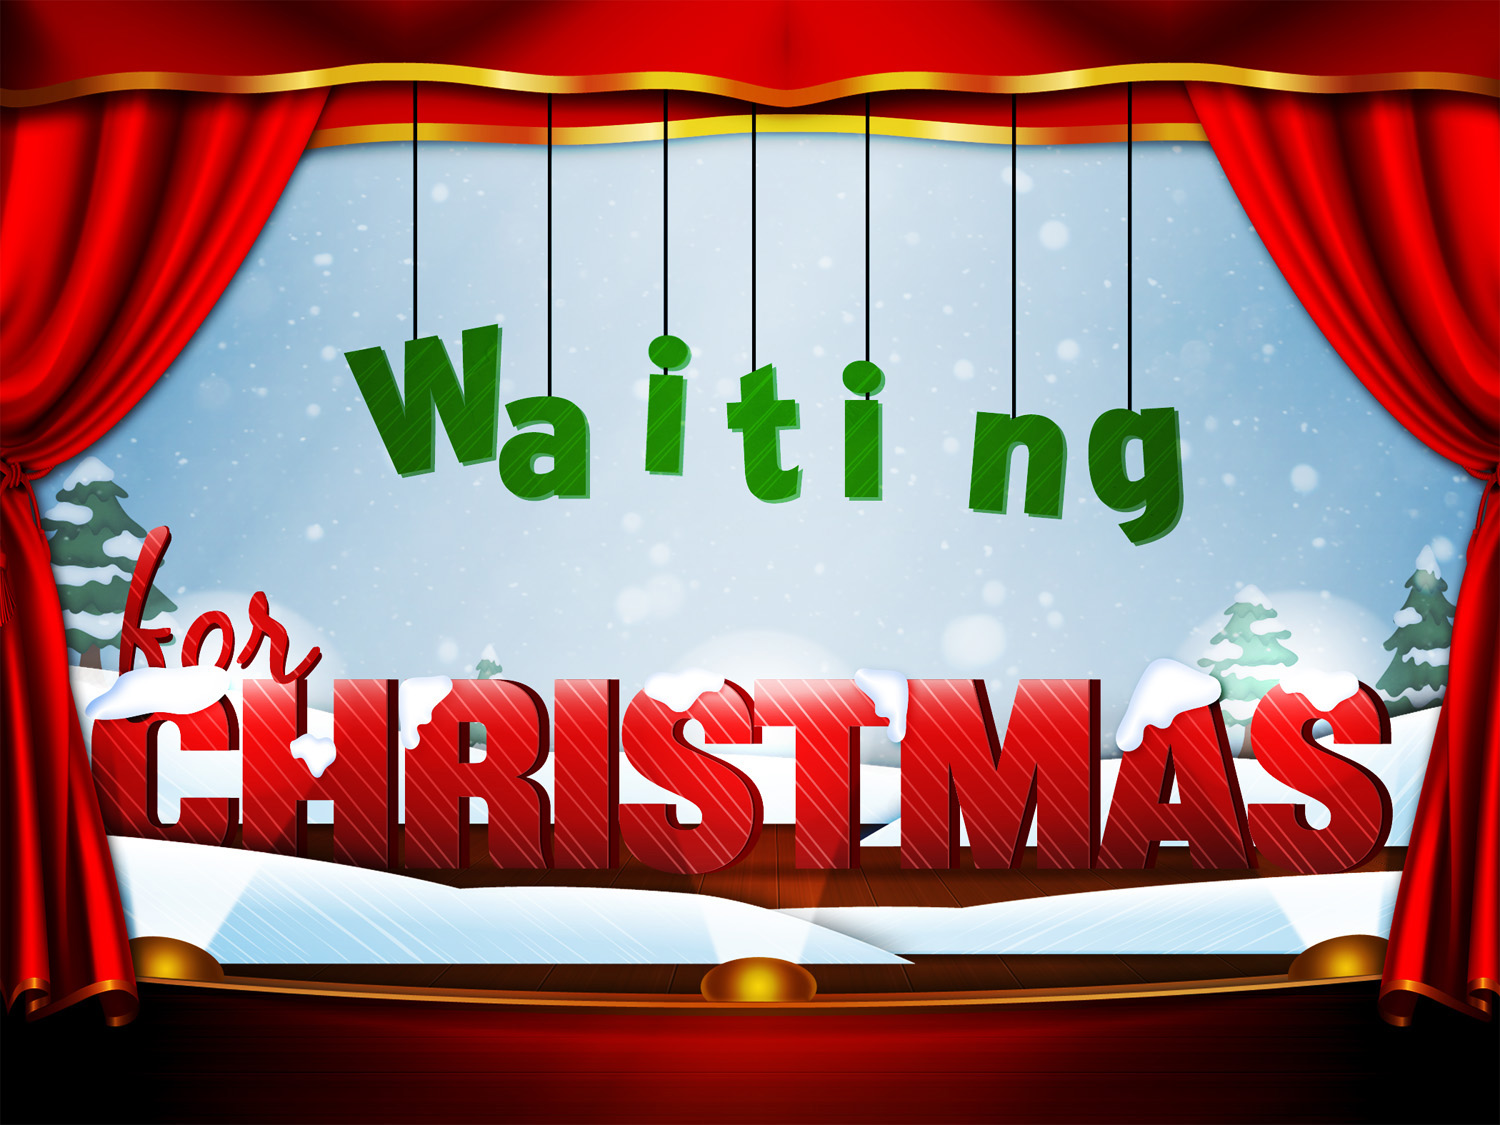 Waiting-for-Christmas-2012_std_t_nv